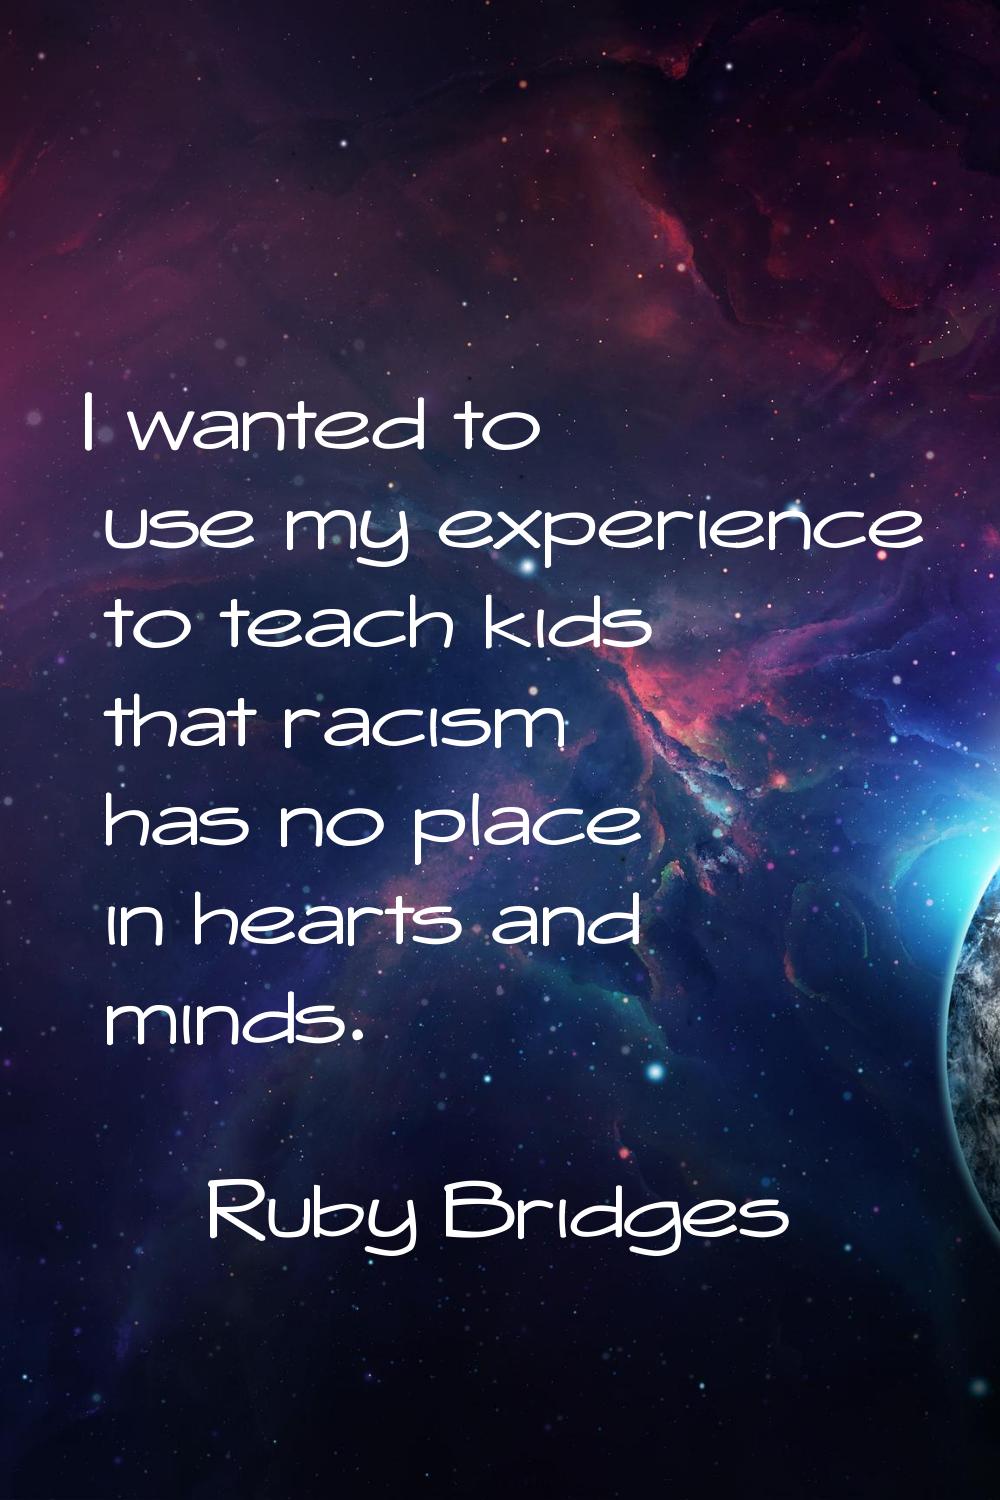 I wanted to use my experience to teach kids that racism has no place in hearts and minds.